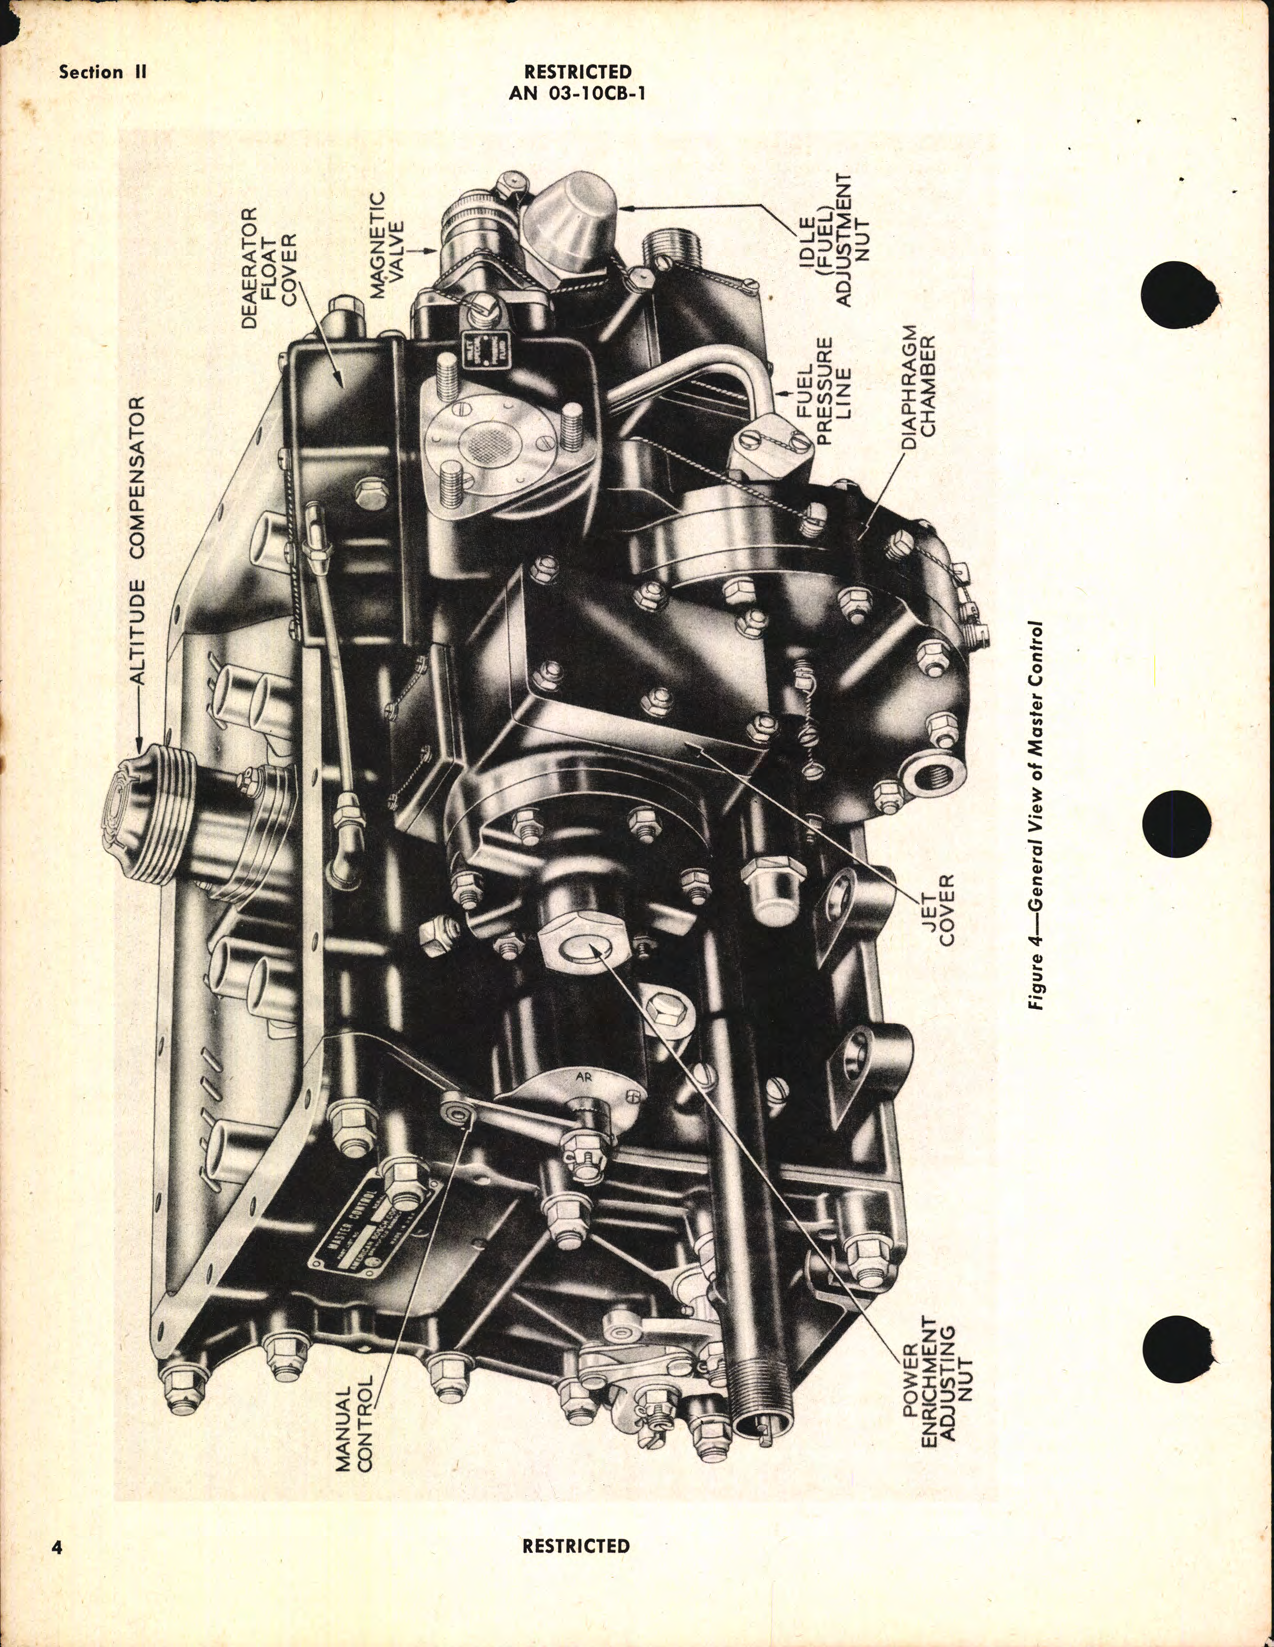 Sample page 8 from AirCorps Library document: Handbook of Instructions with Parts Catalog for Gasoline Injection System Model 58-18-A1B